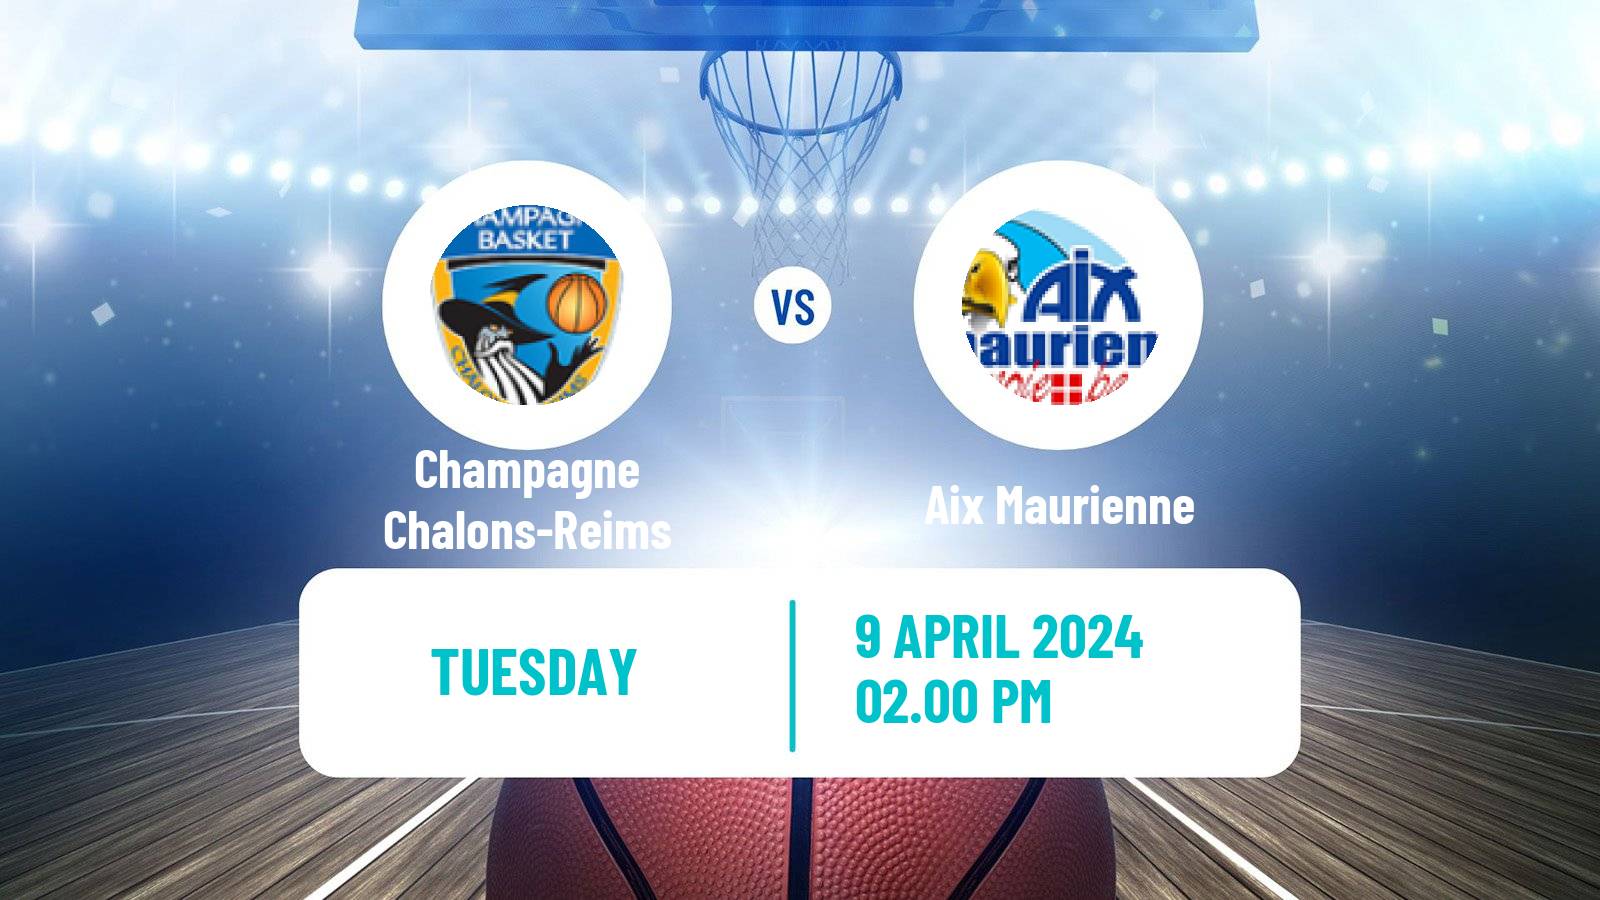 Basketball French LNB Pro B Champagne Chalons-Reims - Aix Maurienne